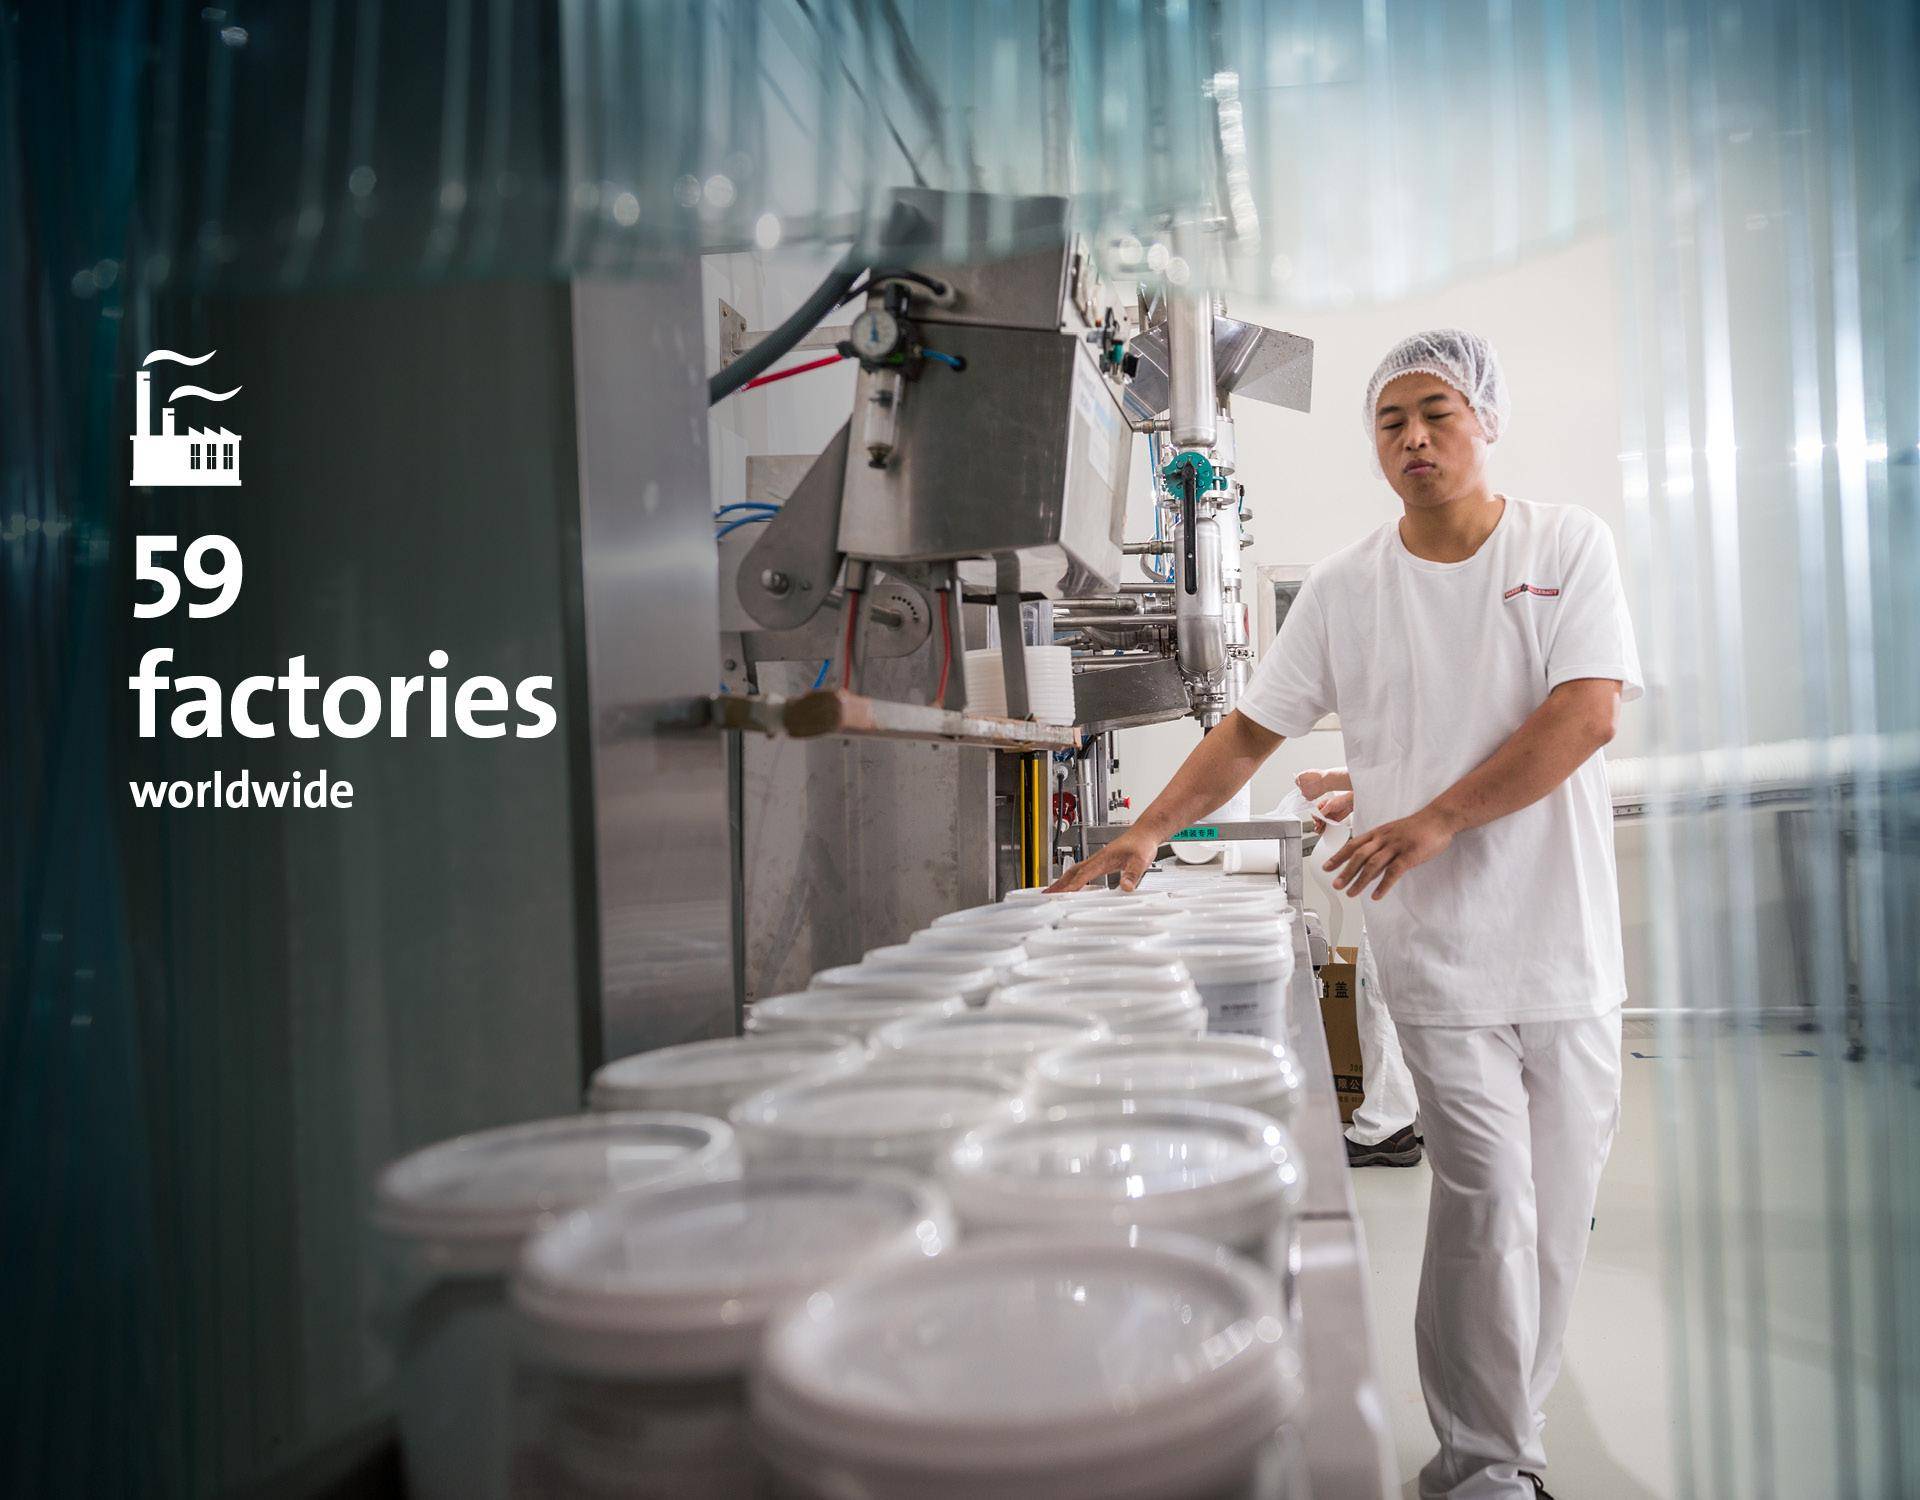 Image Slider Factories Fiscal Year 2017/18 Barry Callebaut Group